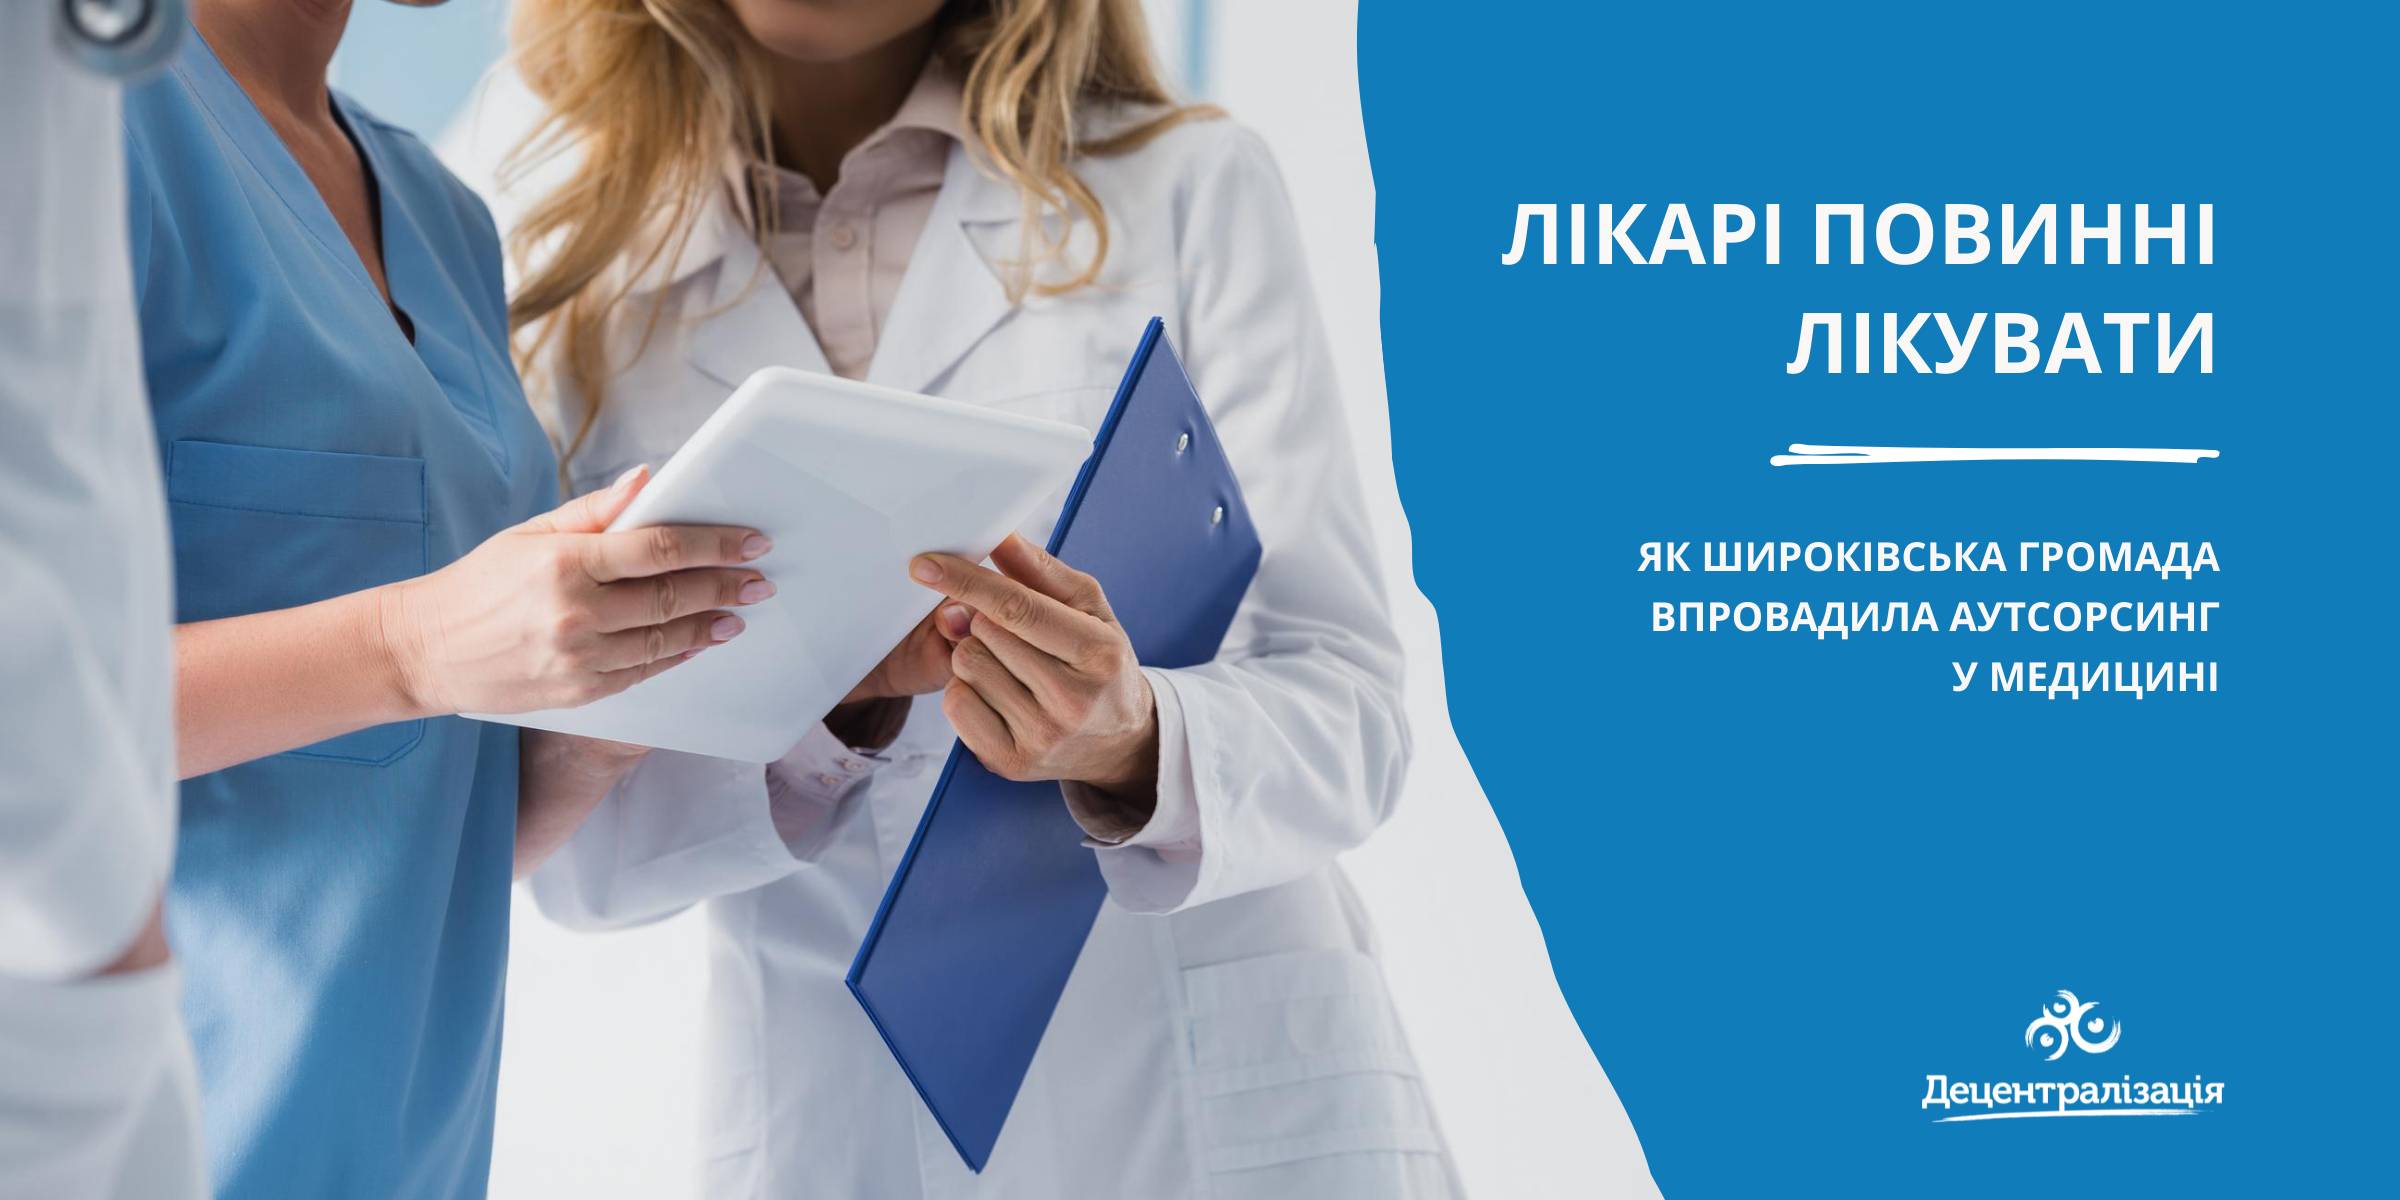 Doctors must treat. How the Shyrokivska municipality has introduced outsourcing in healthcare